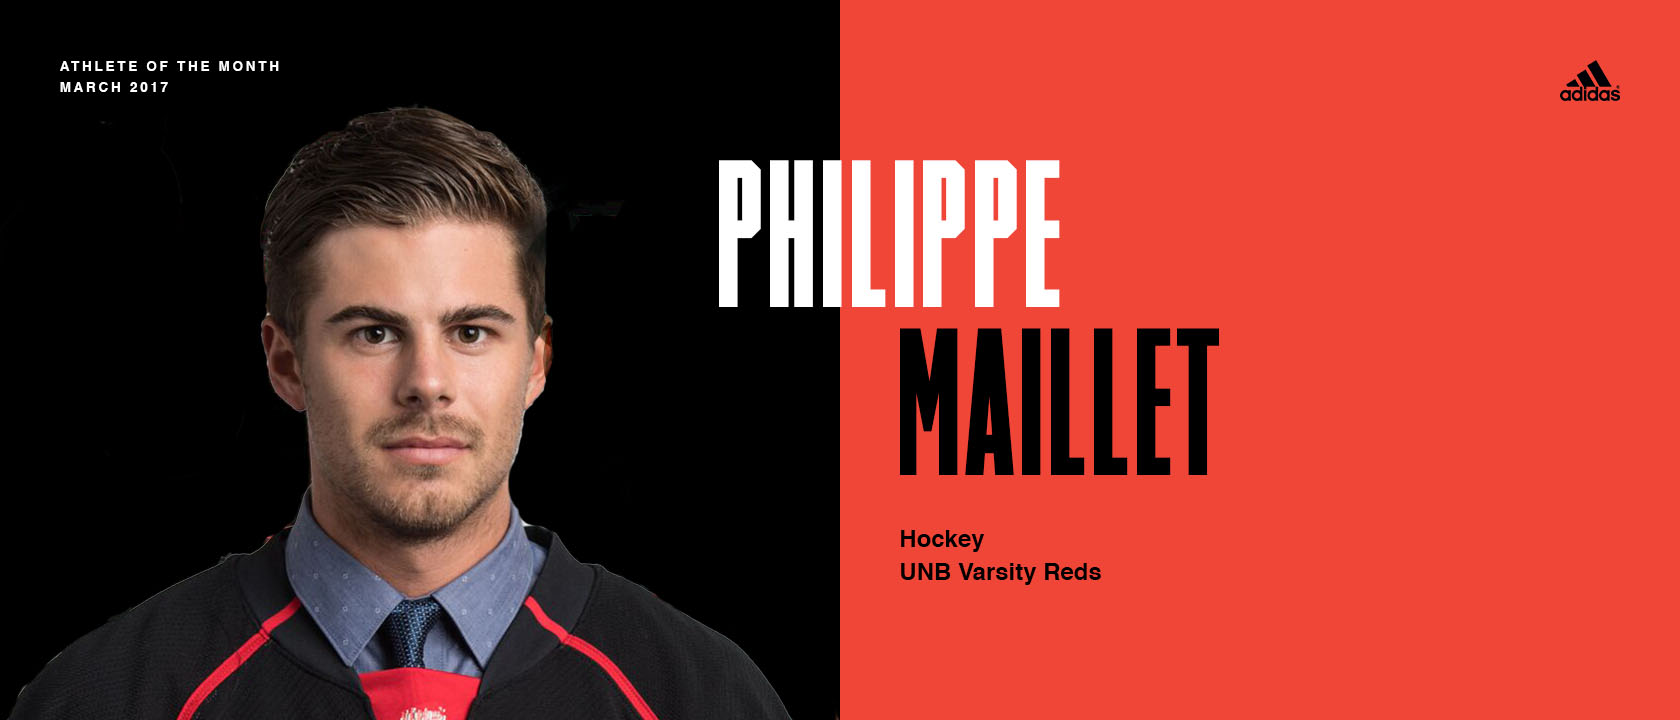 2017 U SPORTS Champions Series:  March Athlete of the Month Maillet’s own March Madness ends with UNB’s second straight national championship